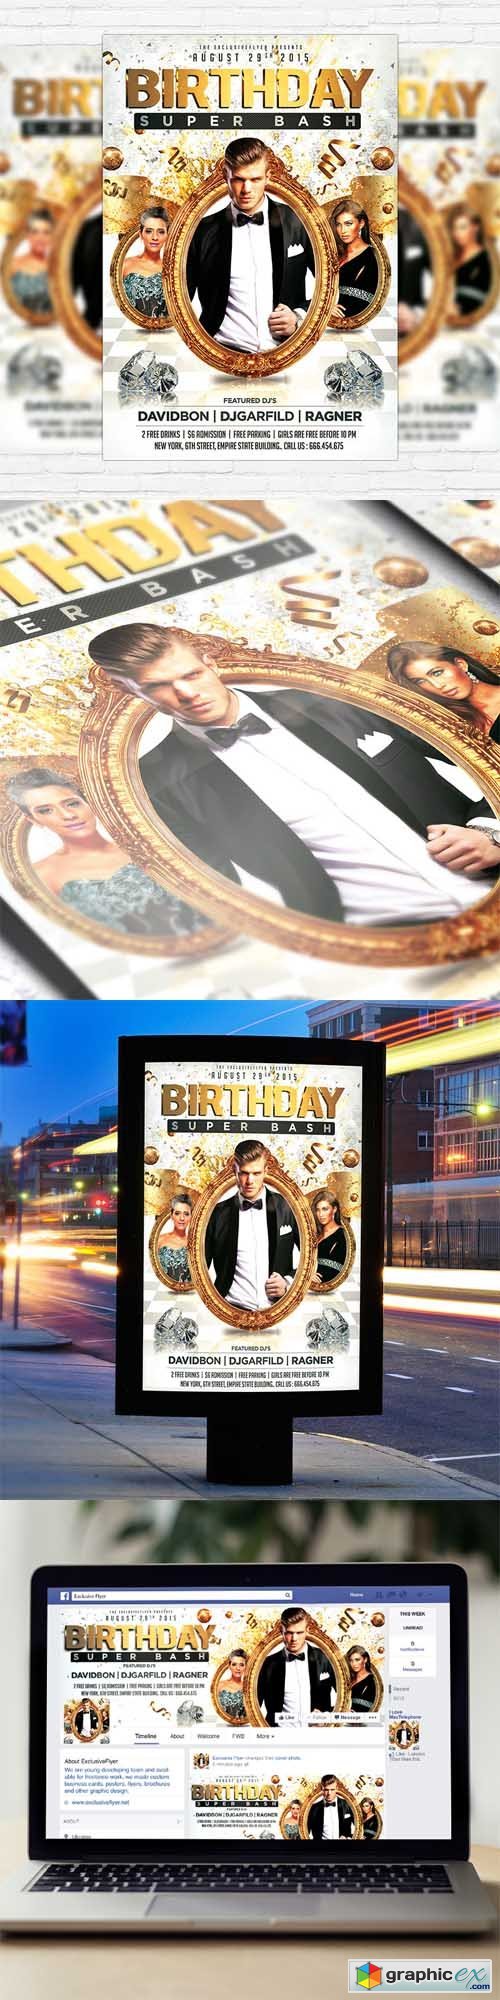 Birthday Super Bash - Flyer Template + Facebook Cover